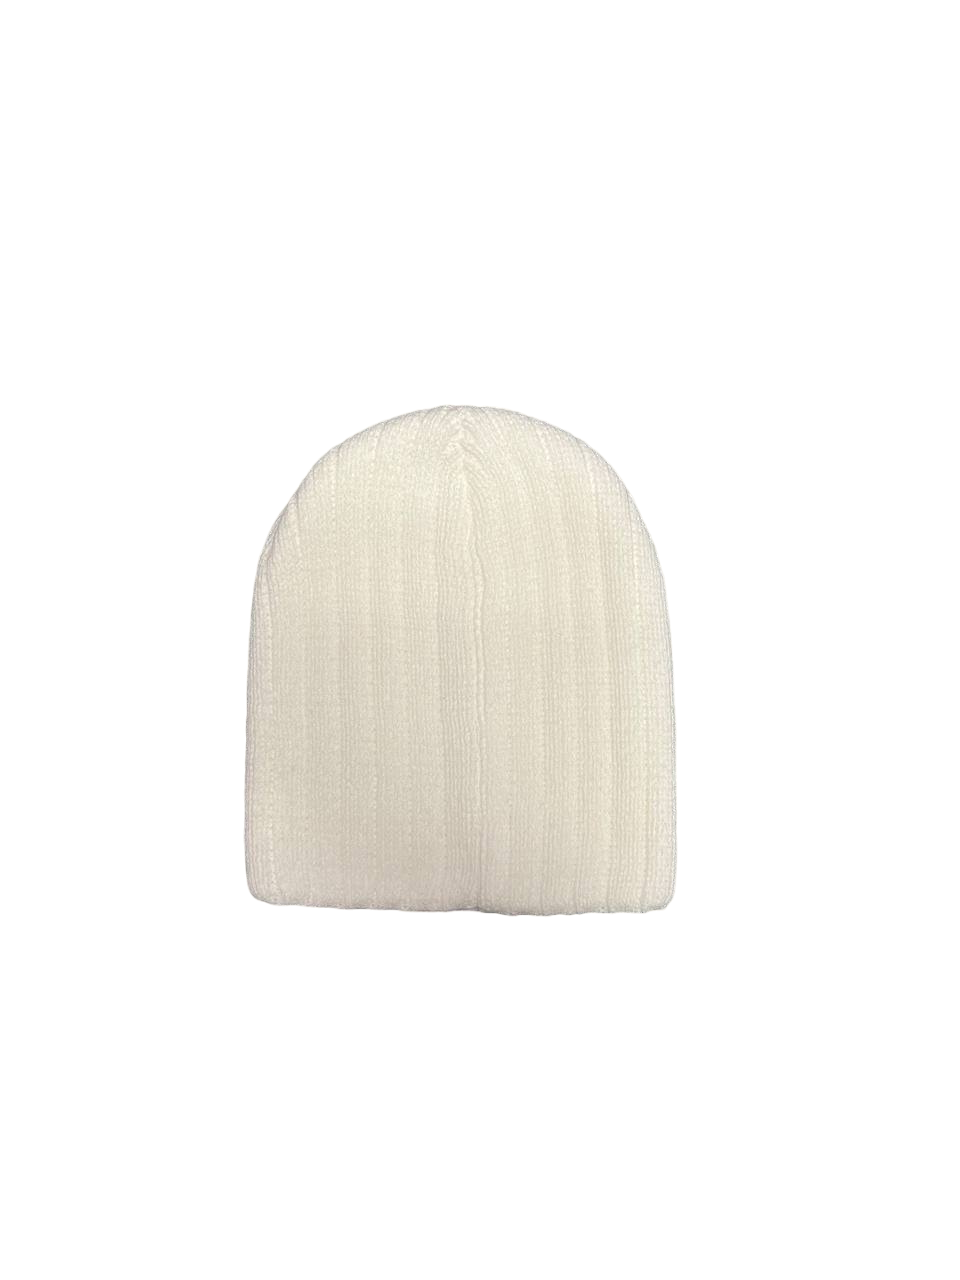 Polish Polska  Knit Winter Hat - White With Eagle - Made in Poland